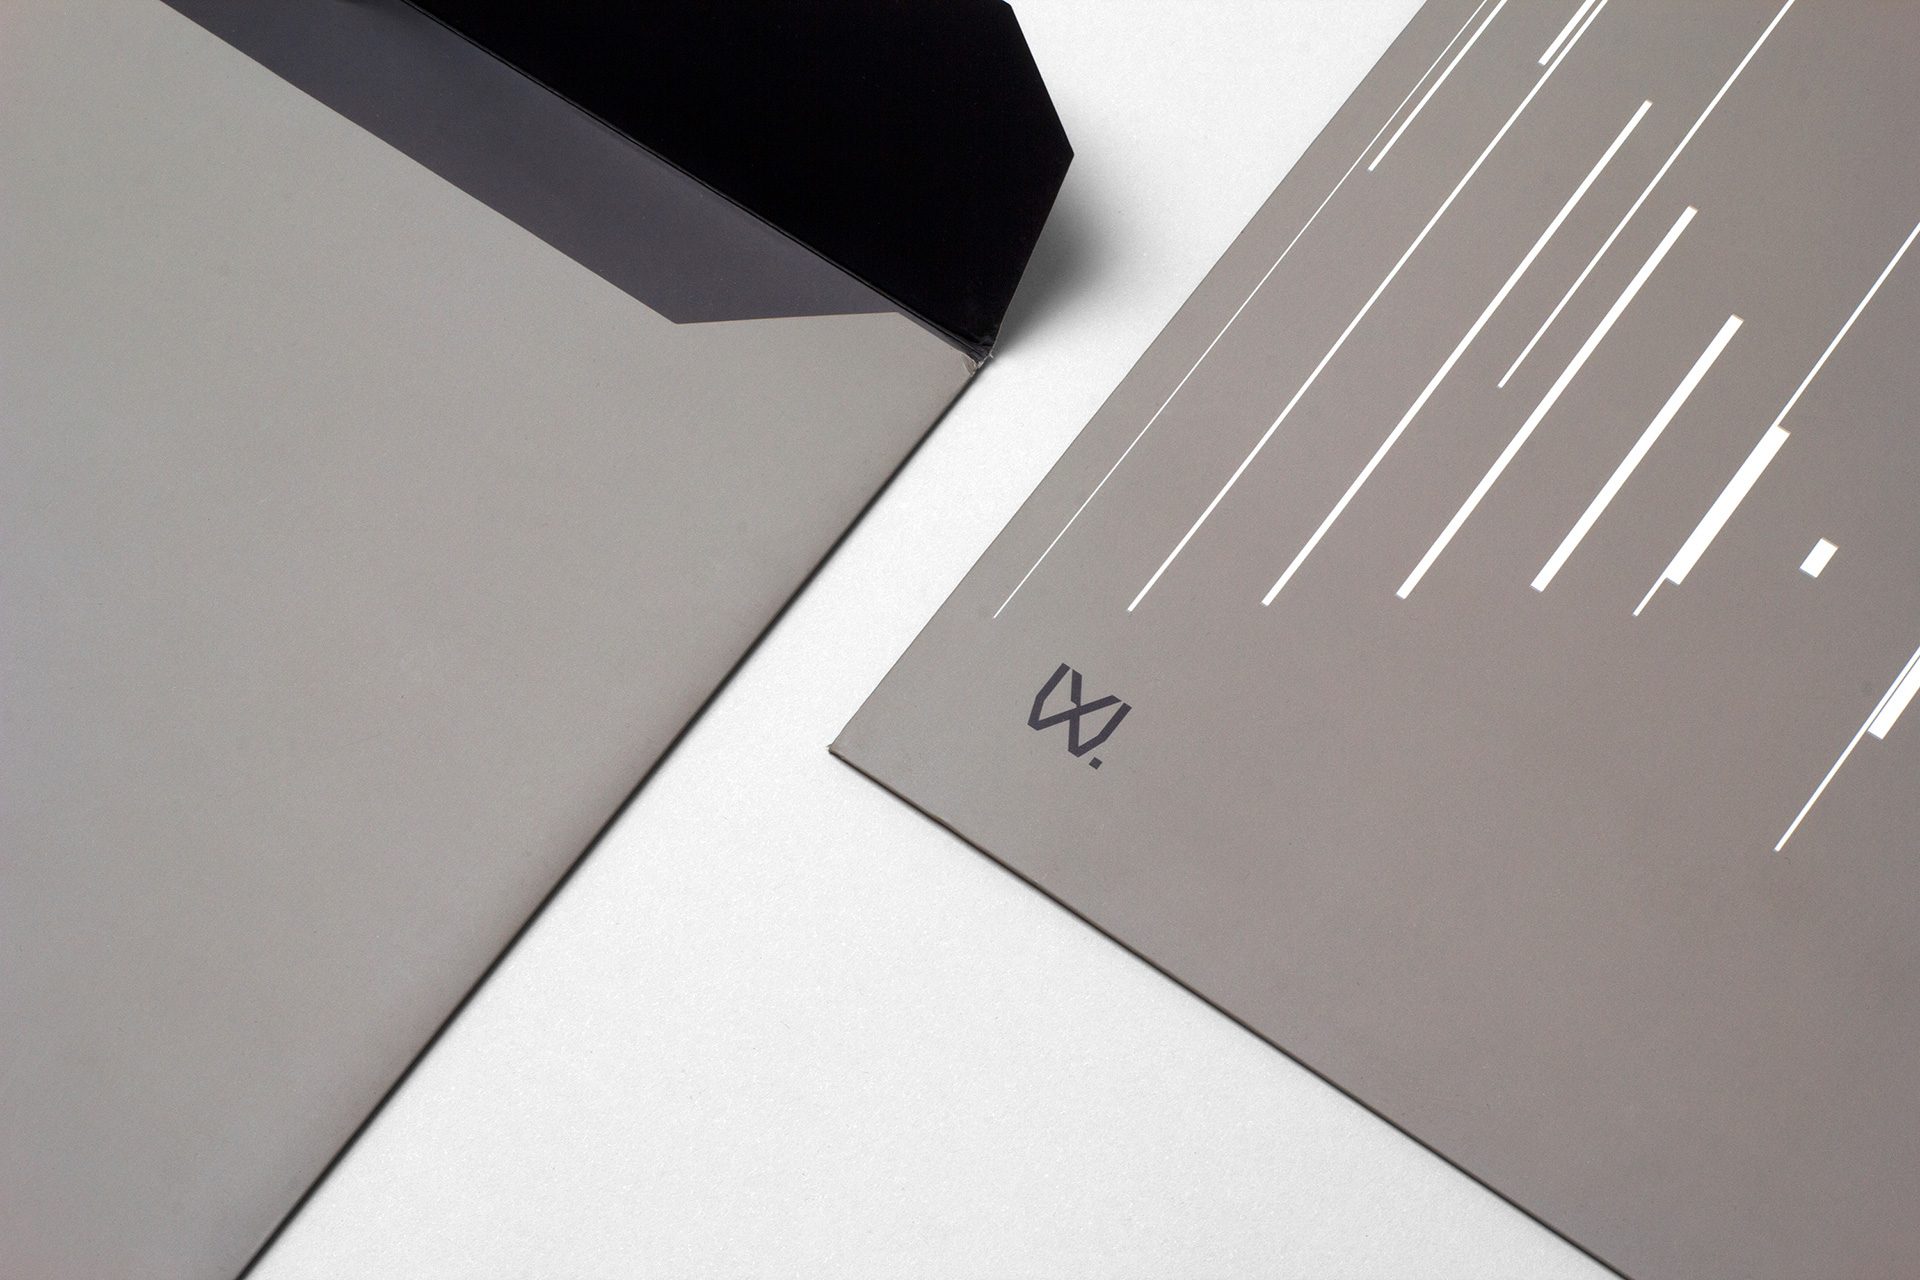 New Logo and Identity for Wixx by BR/BAUEN